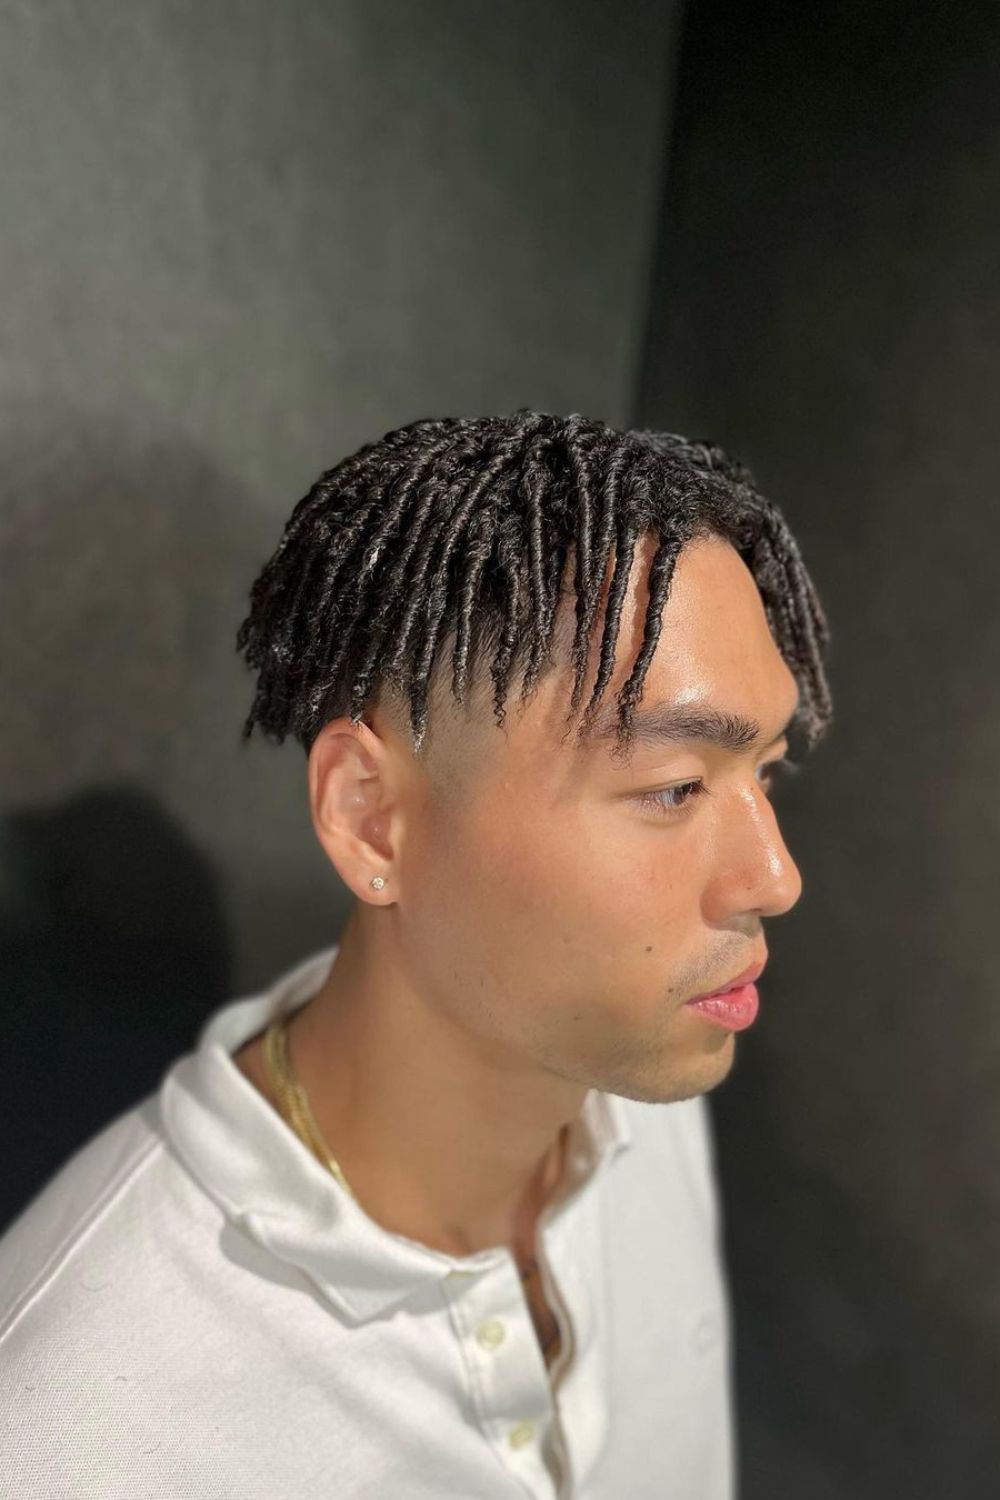 A man with one-strand comb twists.